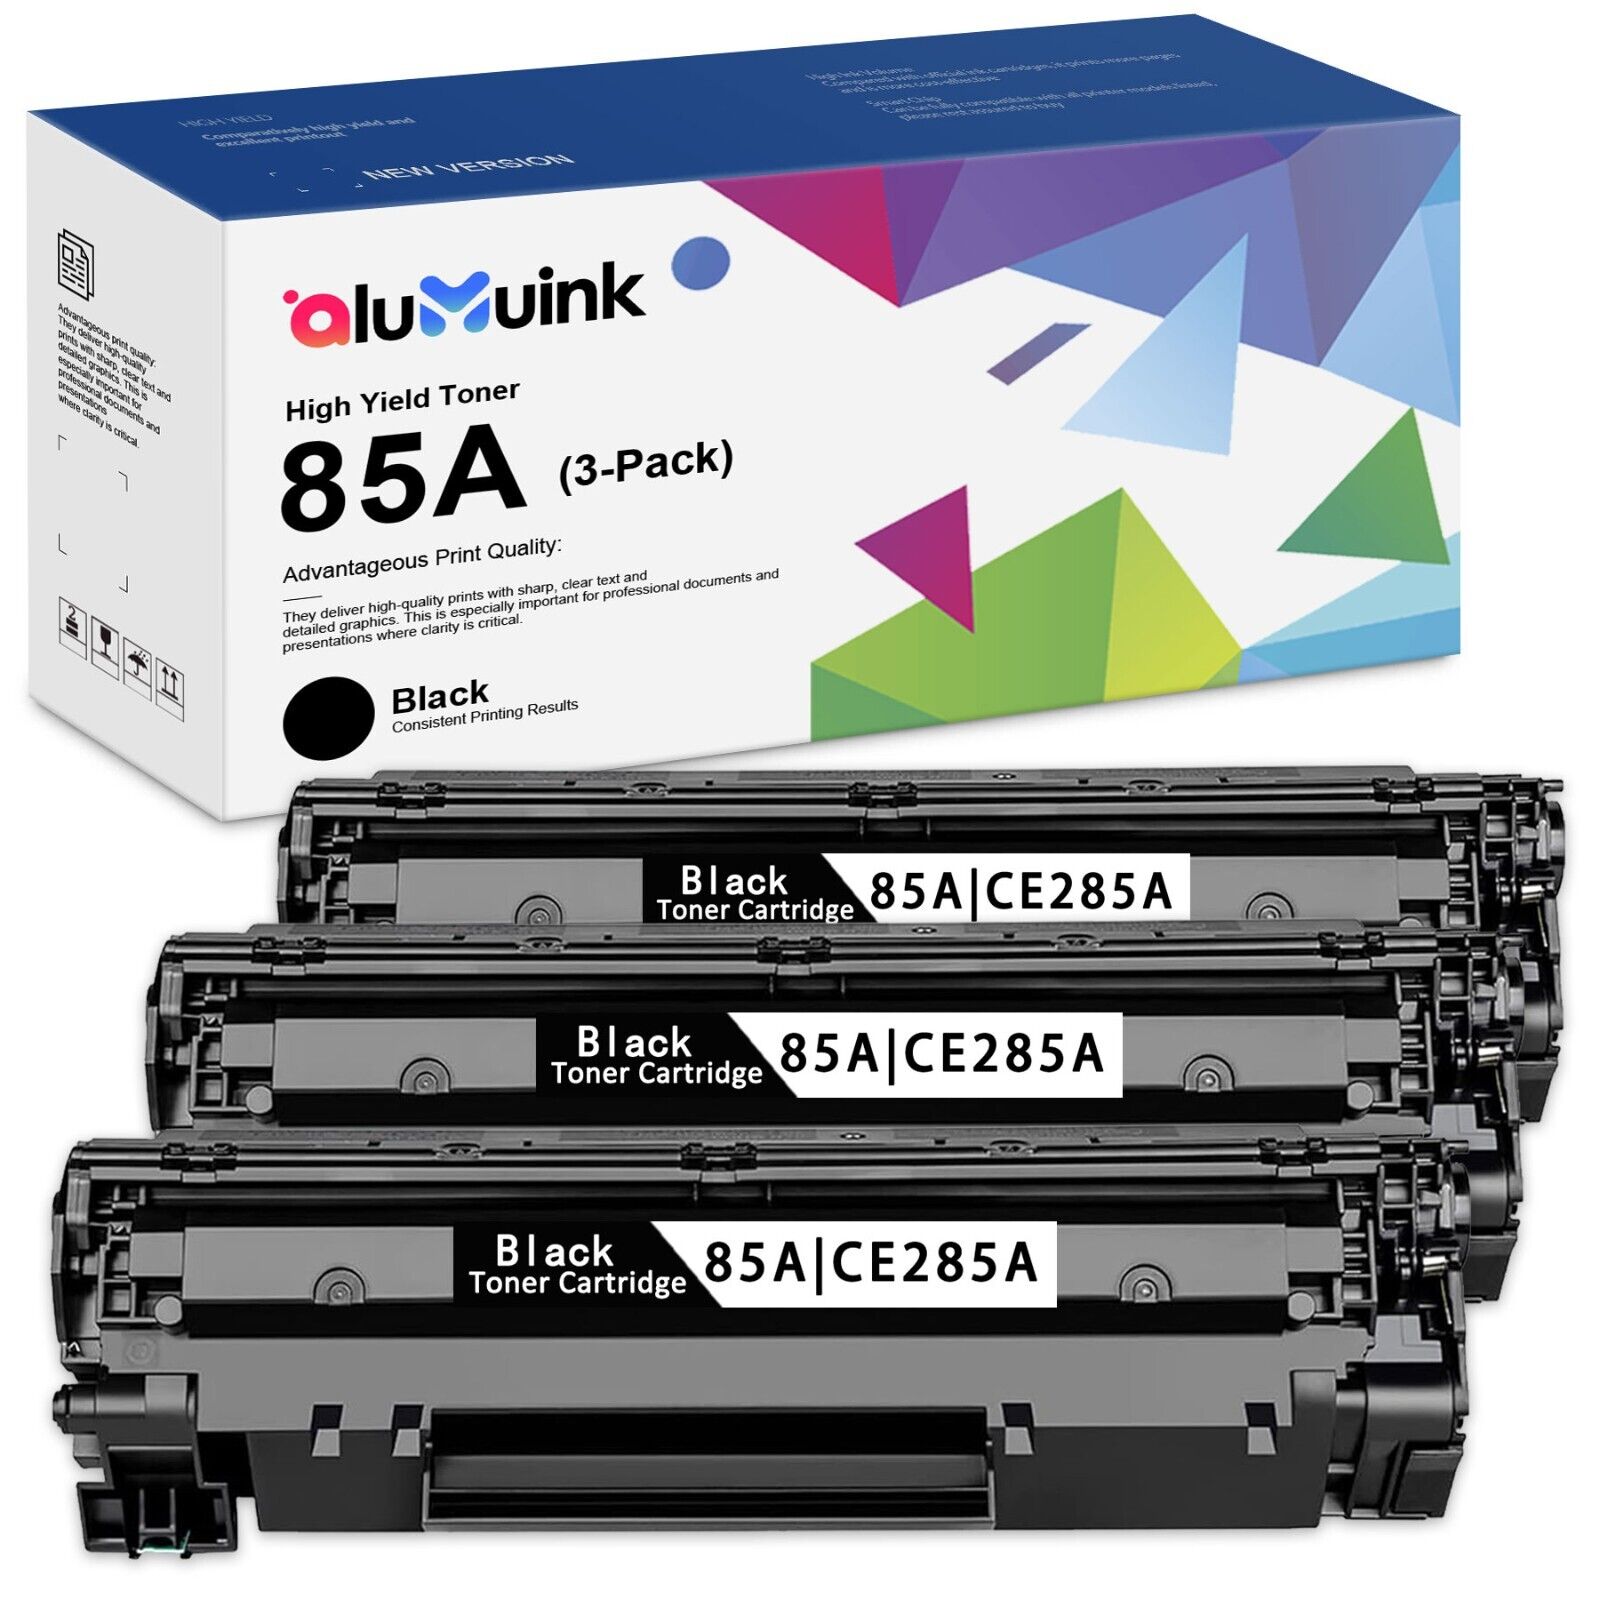 85A Black Toner Cartridge (3-pack) Replacement for HP 85A Toner Pro P1102w P1103